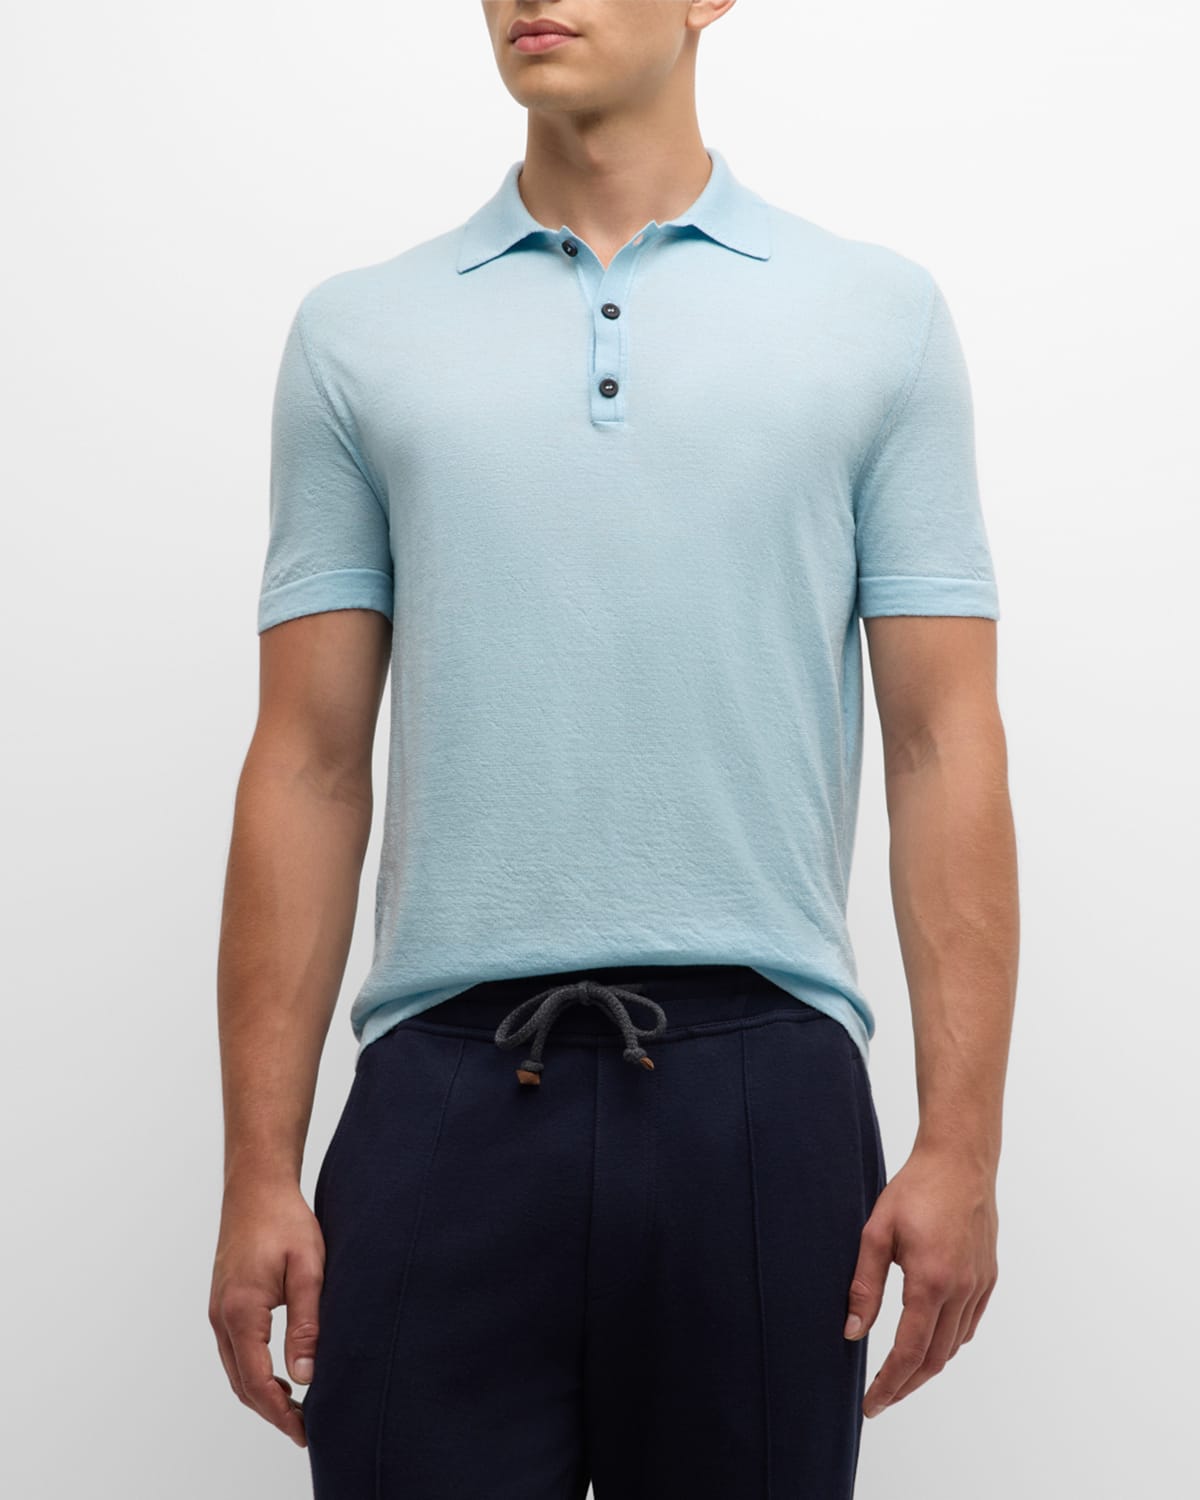 Men's Wool and Silk Polo Shirt